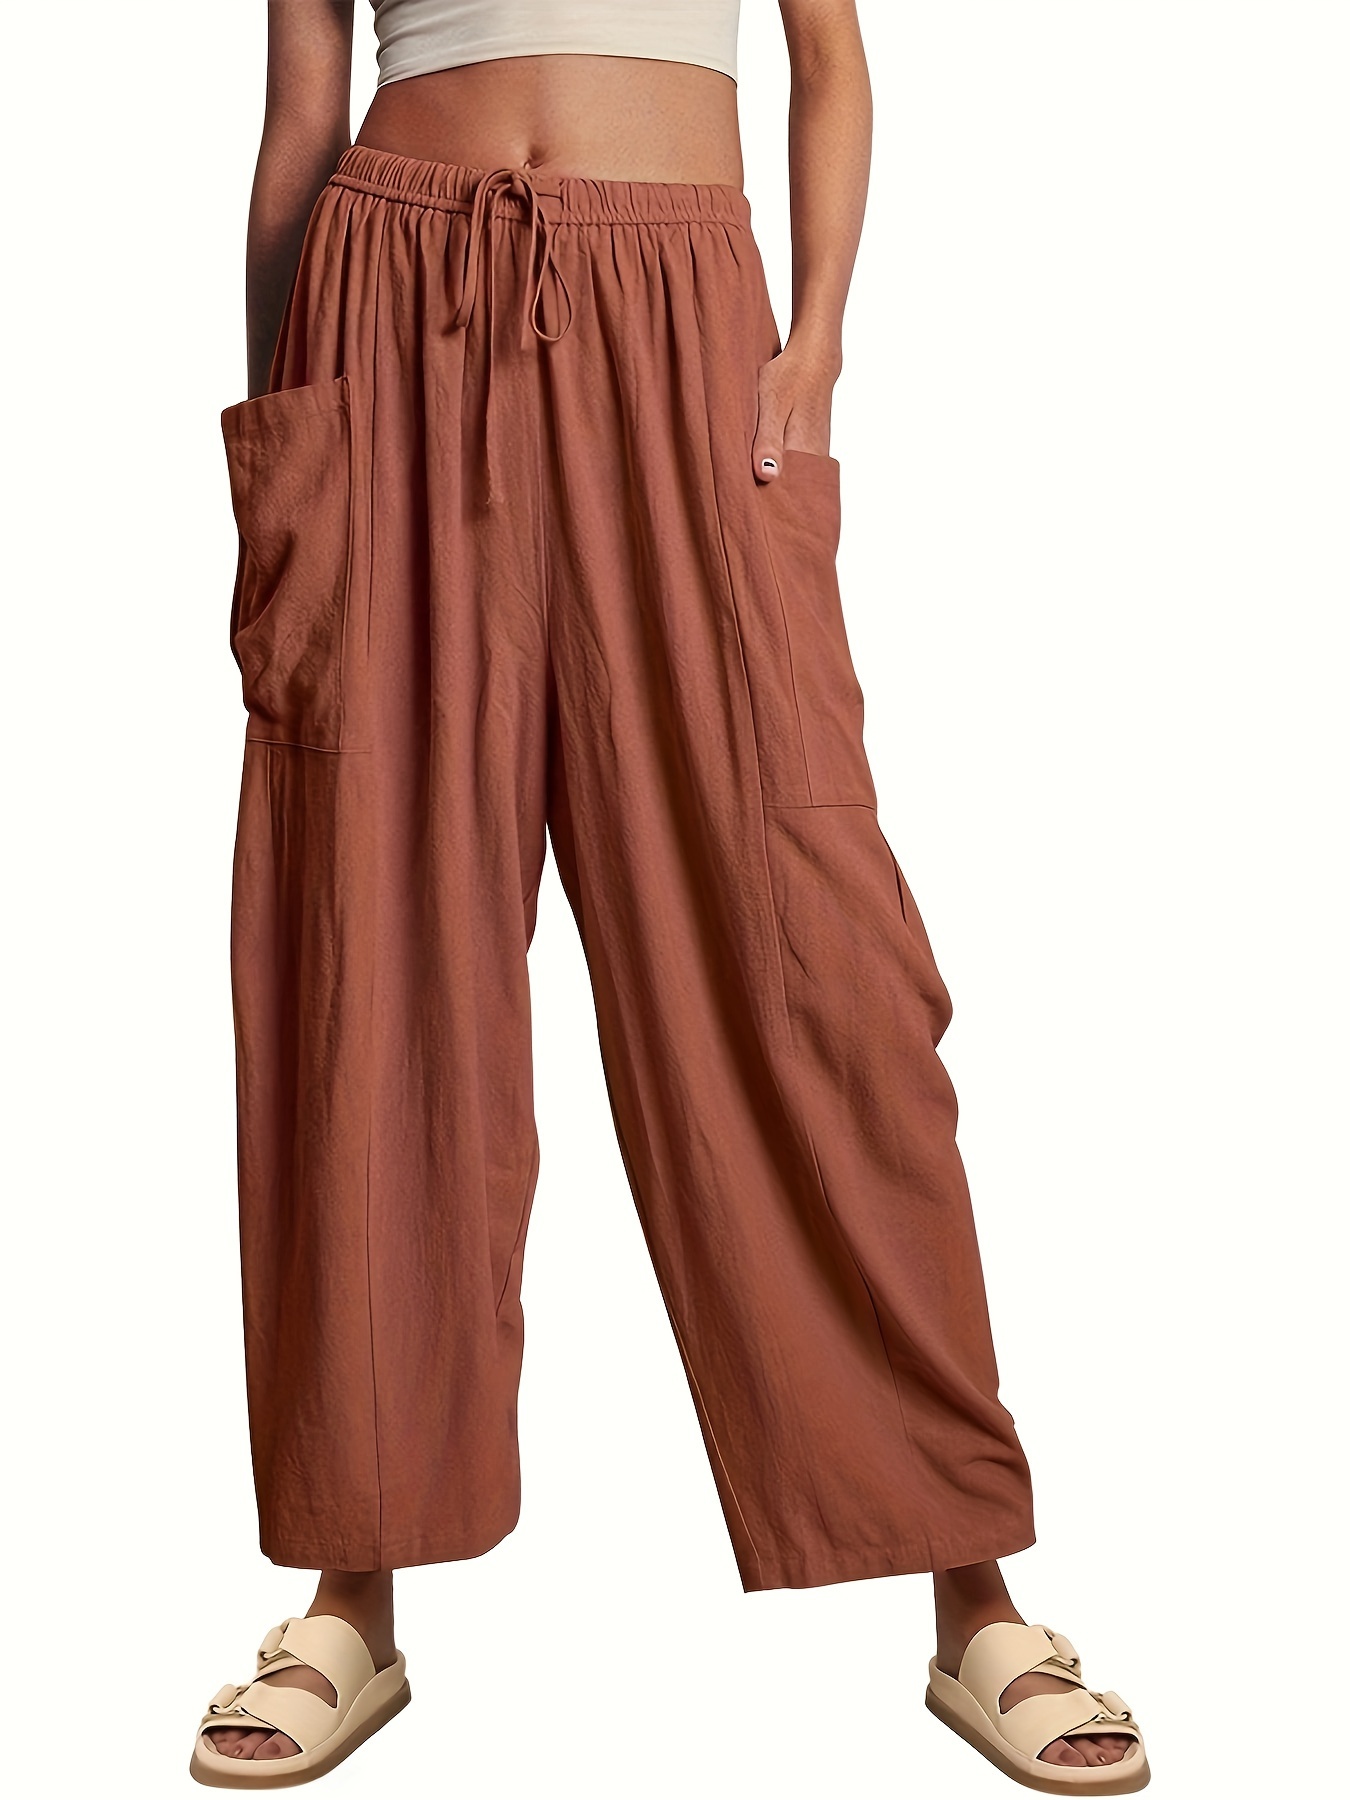 ylioge Normal Waist Solid Color Trousers for Women Linen Cruise Autumn  Pants Harem Cropped Wide Leg Baggy Casual Trousers Pantalones 